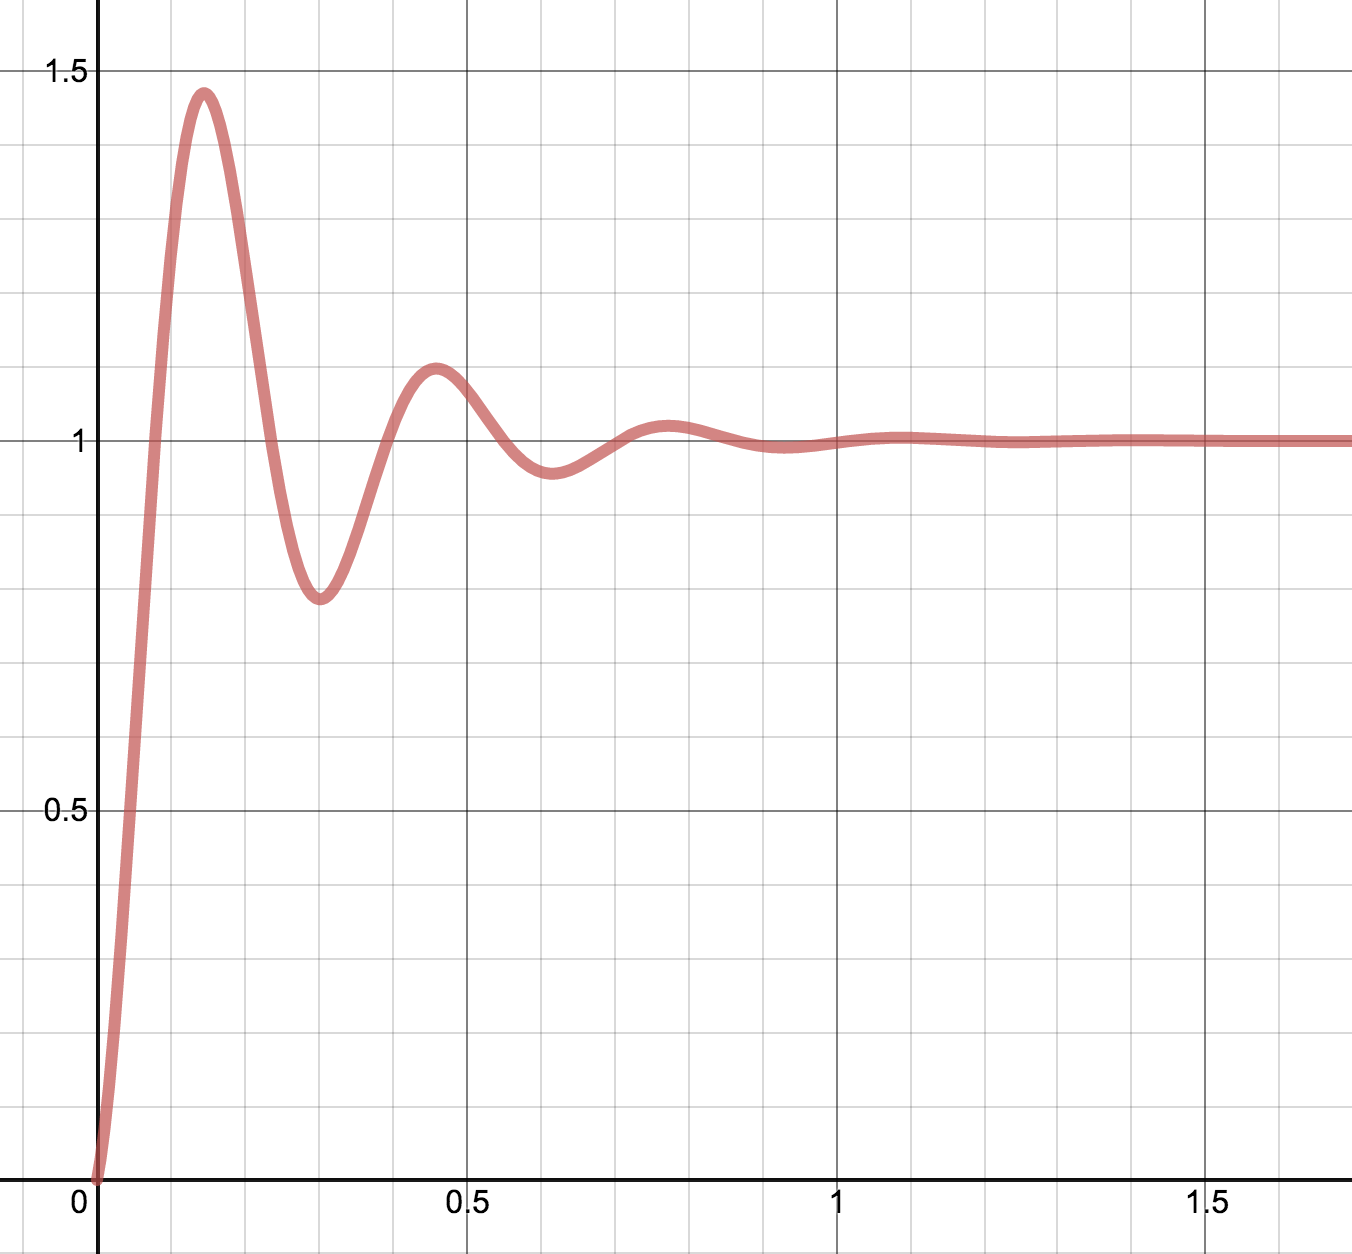 The graph of bounce animation interpolation